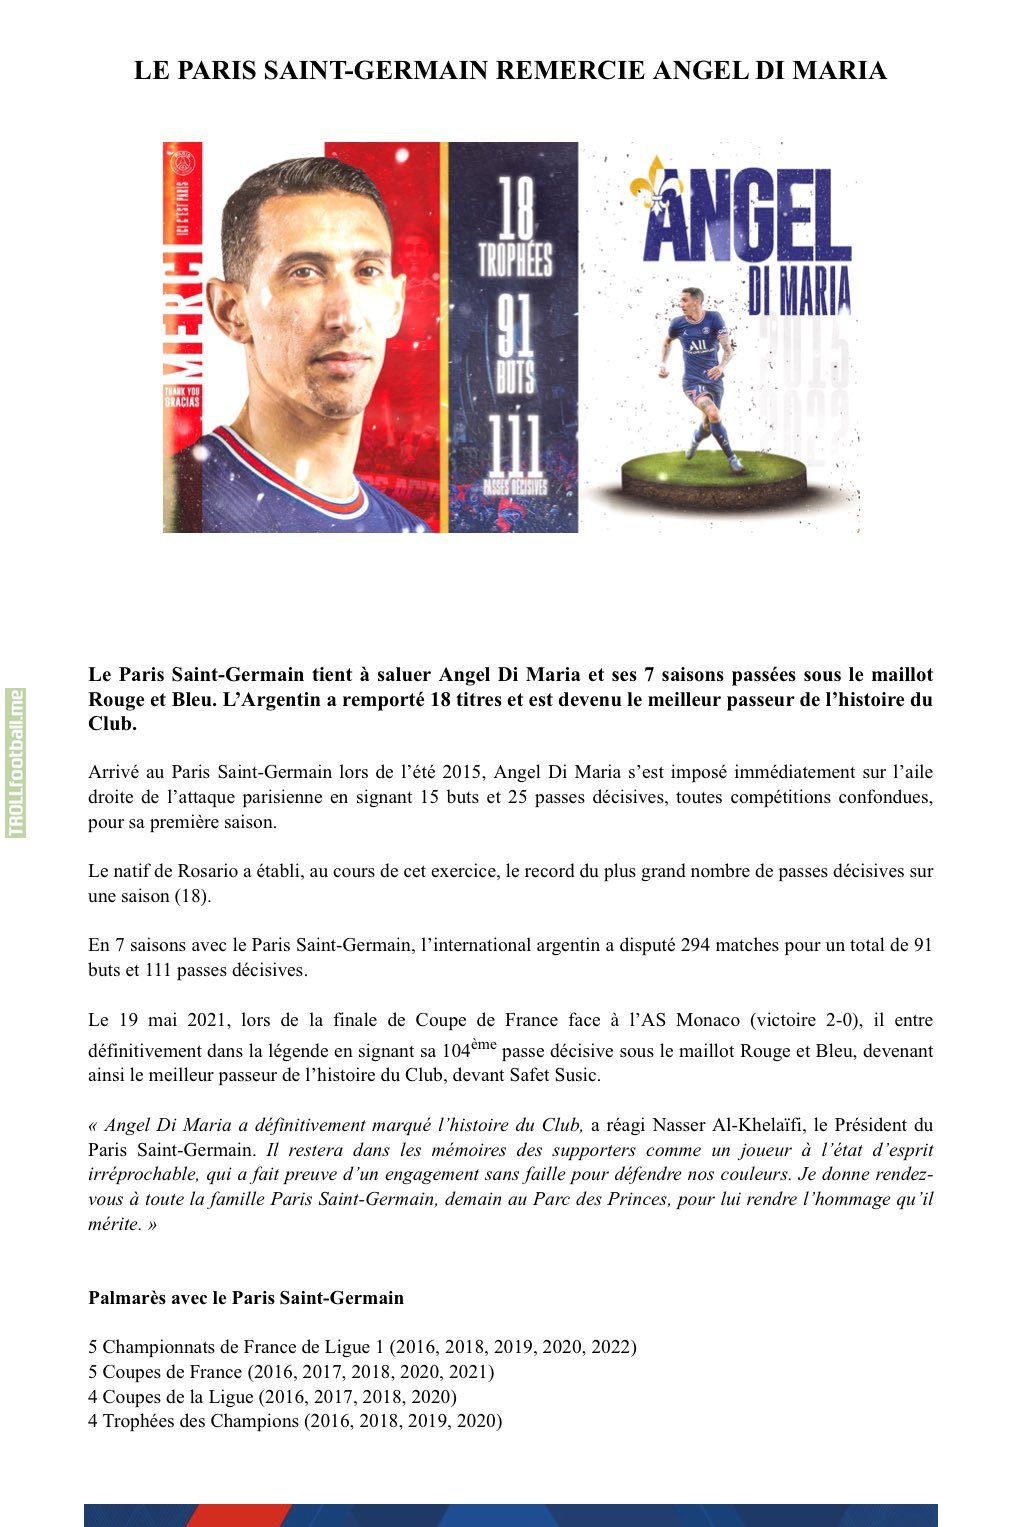 PSG announces Ángel Di María's departure after 7 seasons at the club. The Argentine won 18 titles and is the club's leading assist provider all-time.